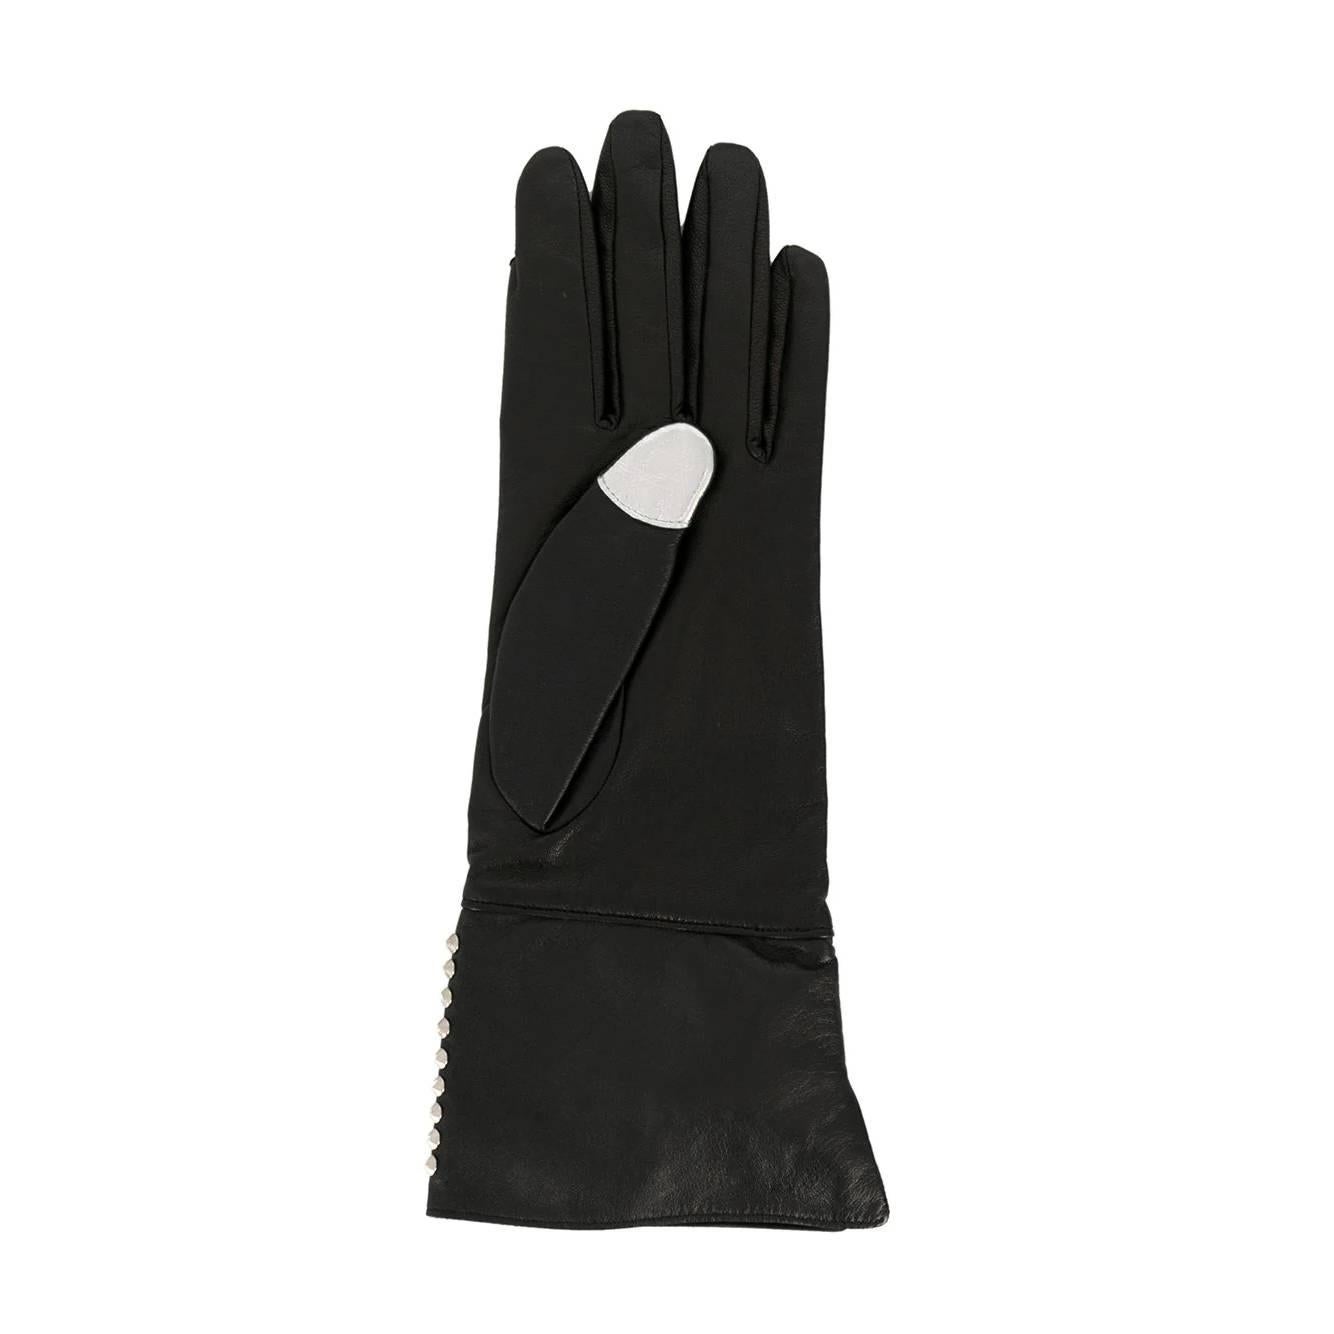 2000s Yohji Yamamoto Leather Gloves In Excellent Condition For Sale In Lugo (RA), IT